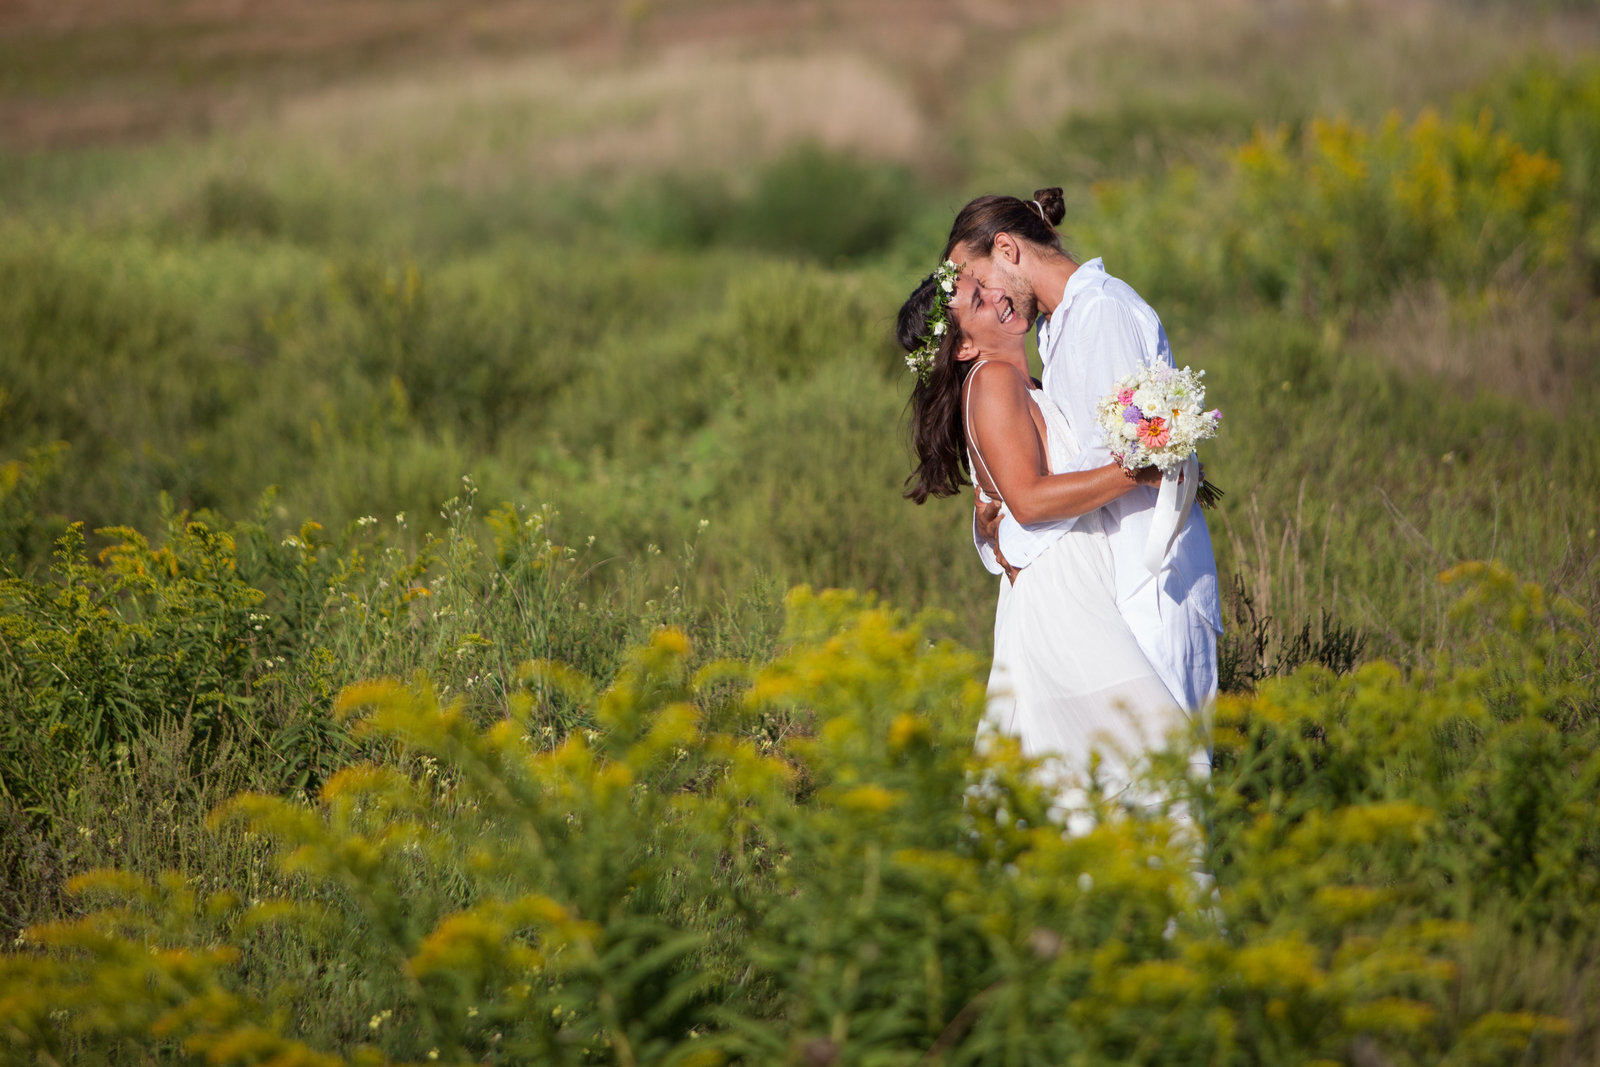 Bride and groom kissing in field of grass